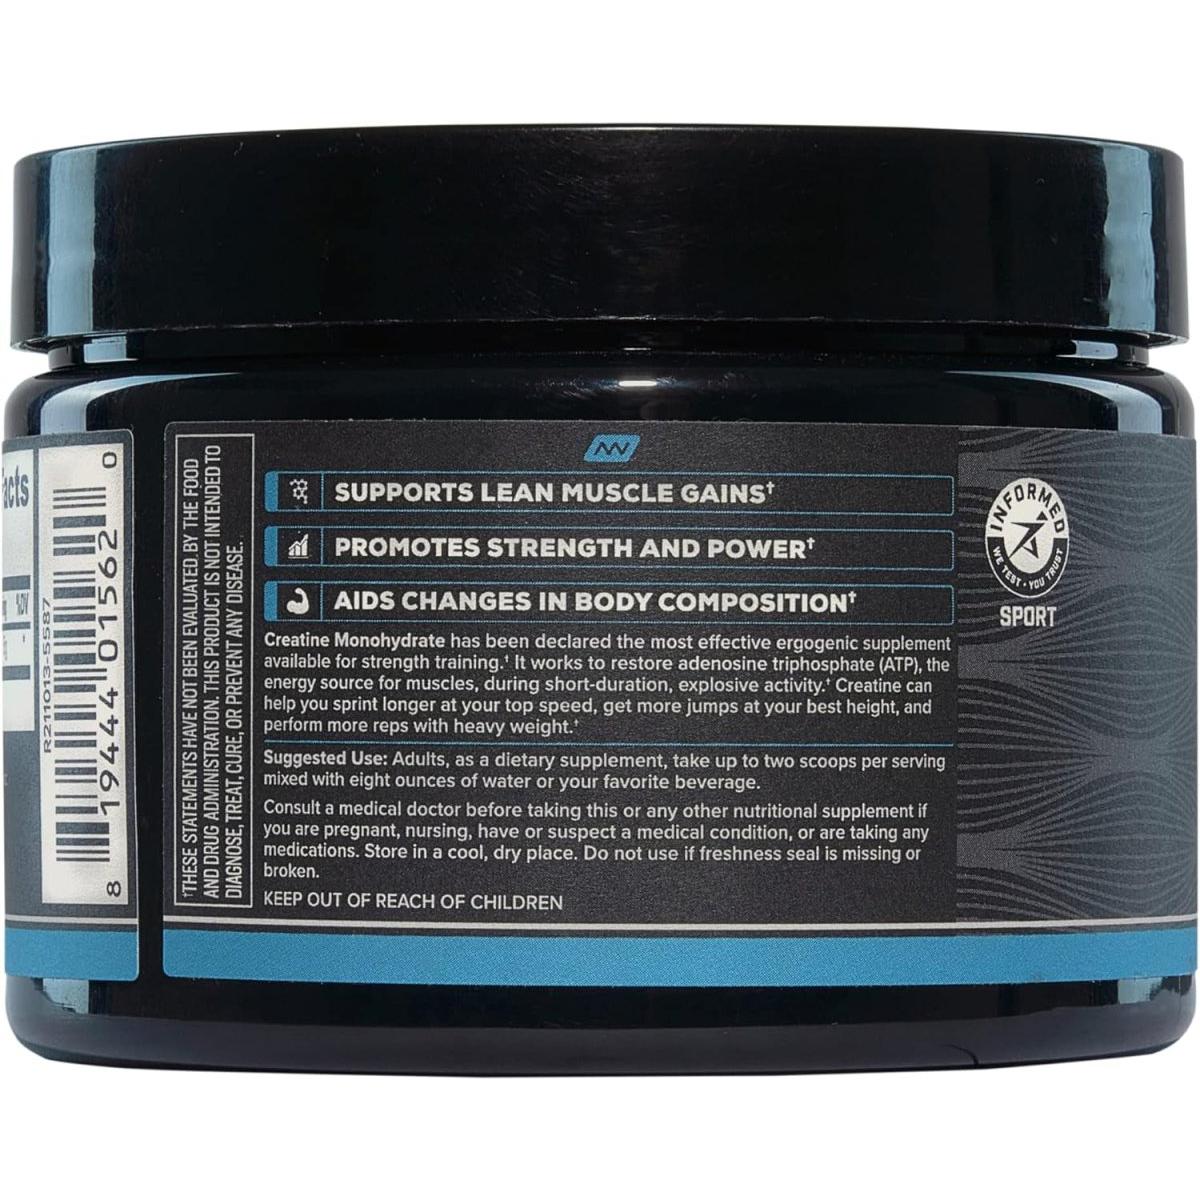 Onnit Creatine Monohydrate - 5G per Serving (30 Serving Tub) - Glam Global UK